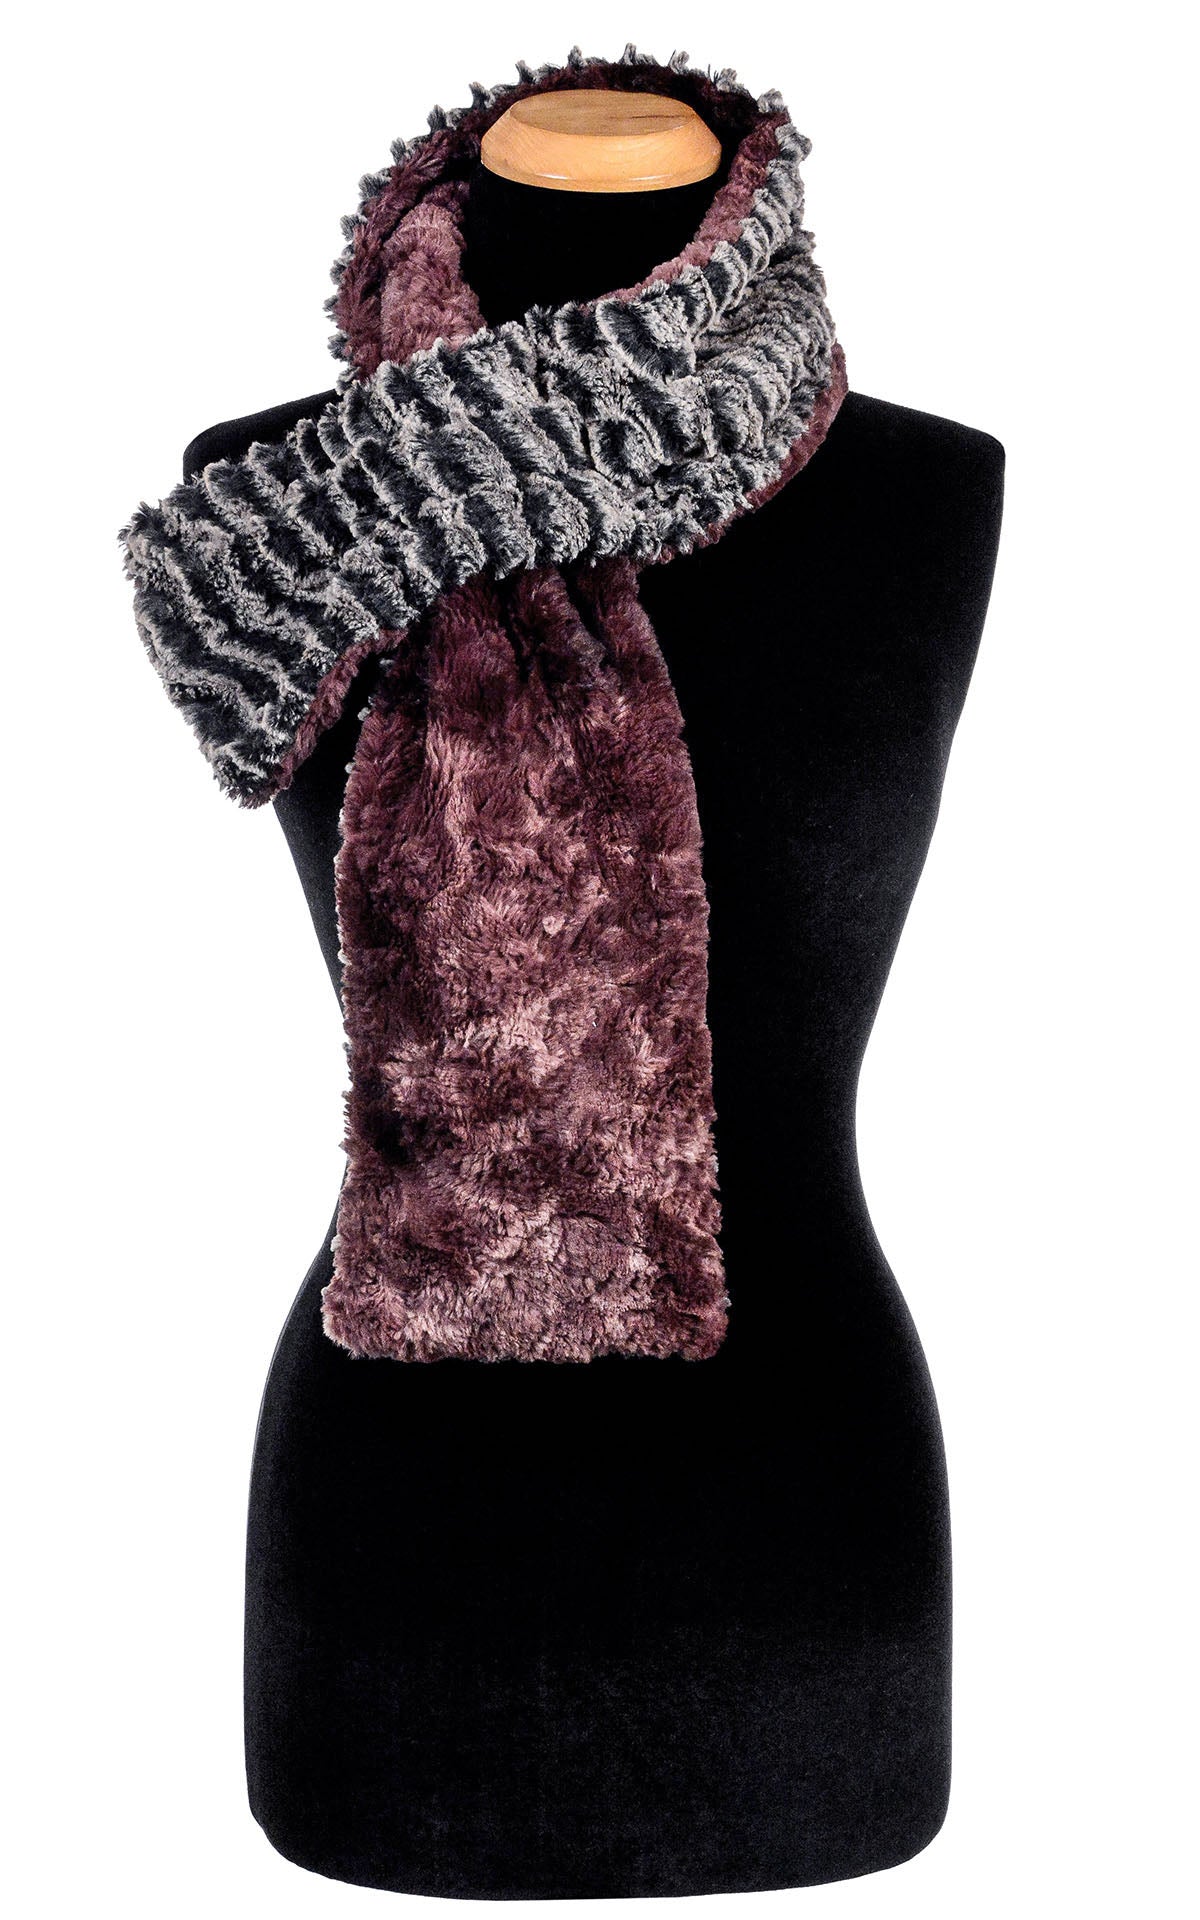 Ladies reversible Long Pull Through Scarf | Deseret Sand in Charcoal gray with Highland in Thistle faux fur, Mauve tie-dye and grey | Handmade in Seattle WA | Pandemonium Millinery